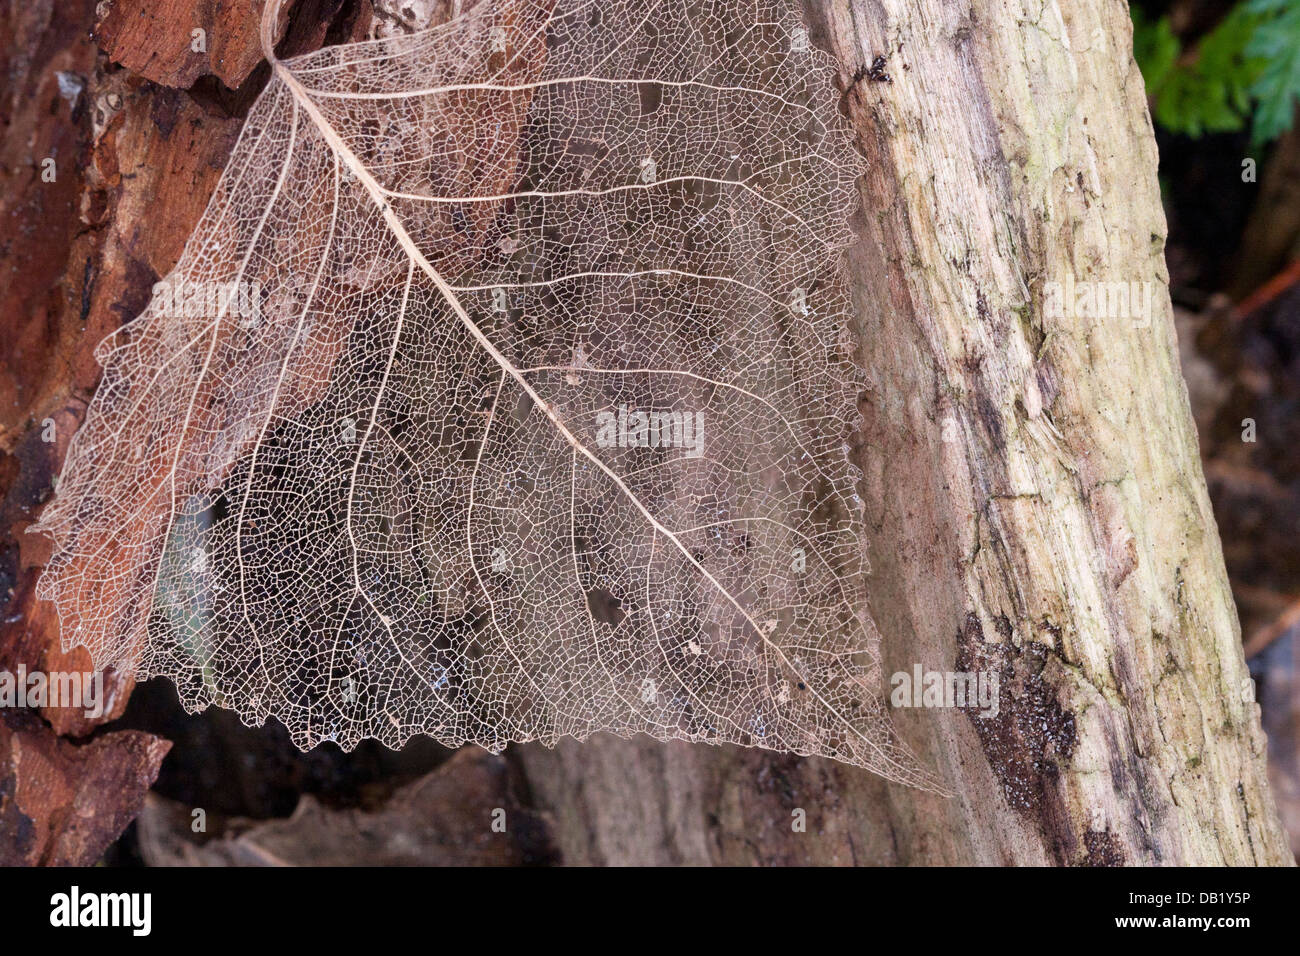 Partially decayed leaf on the forest floor Stock Photo